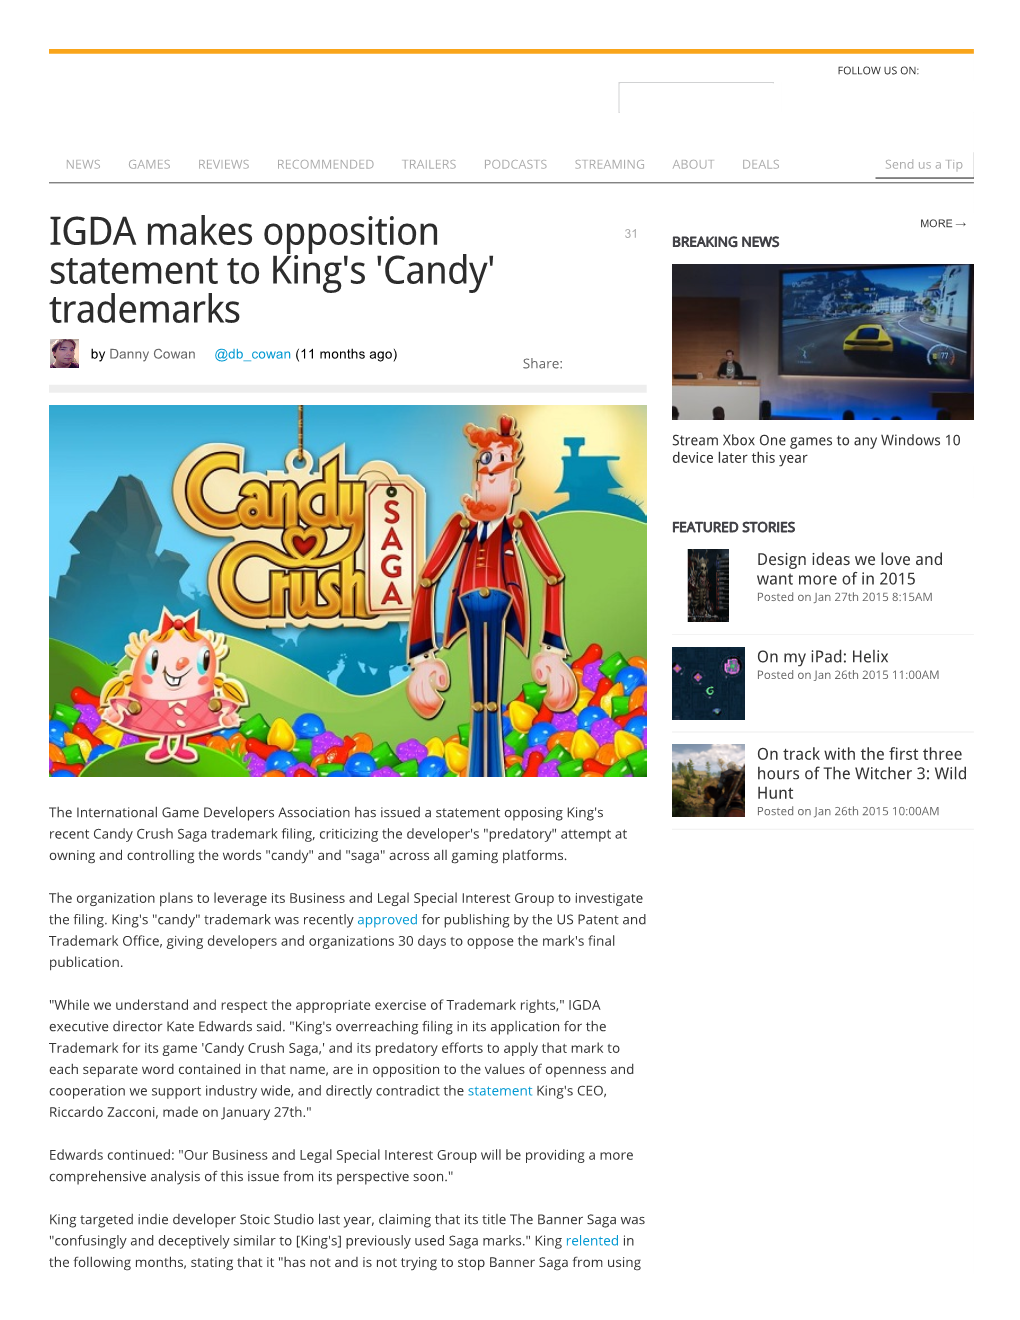 IGDA Makes Opposition Statement to King's 'Candy' Trademarks" a Classier Way of Saying, "The IGDA Has Called King on Their Bull****."